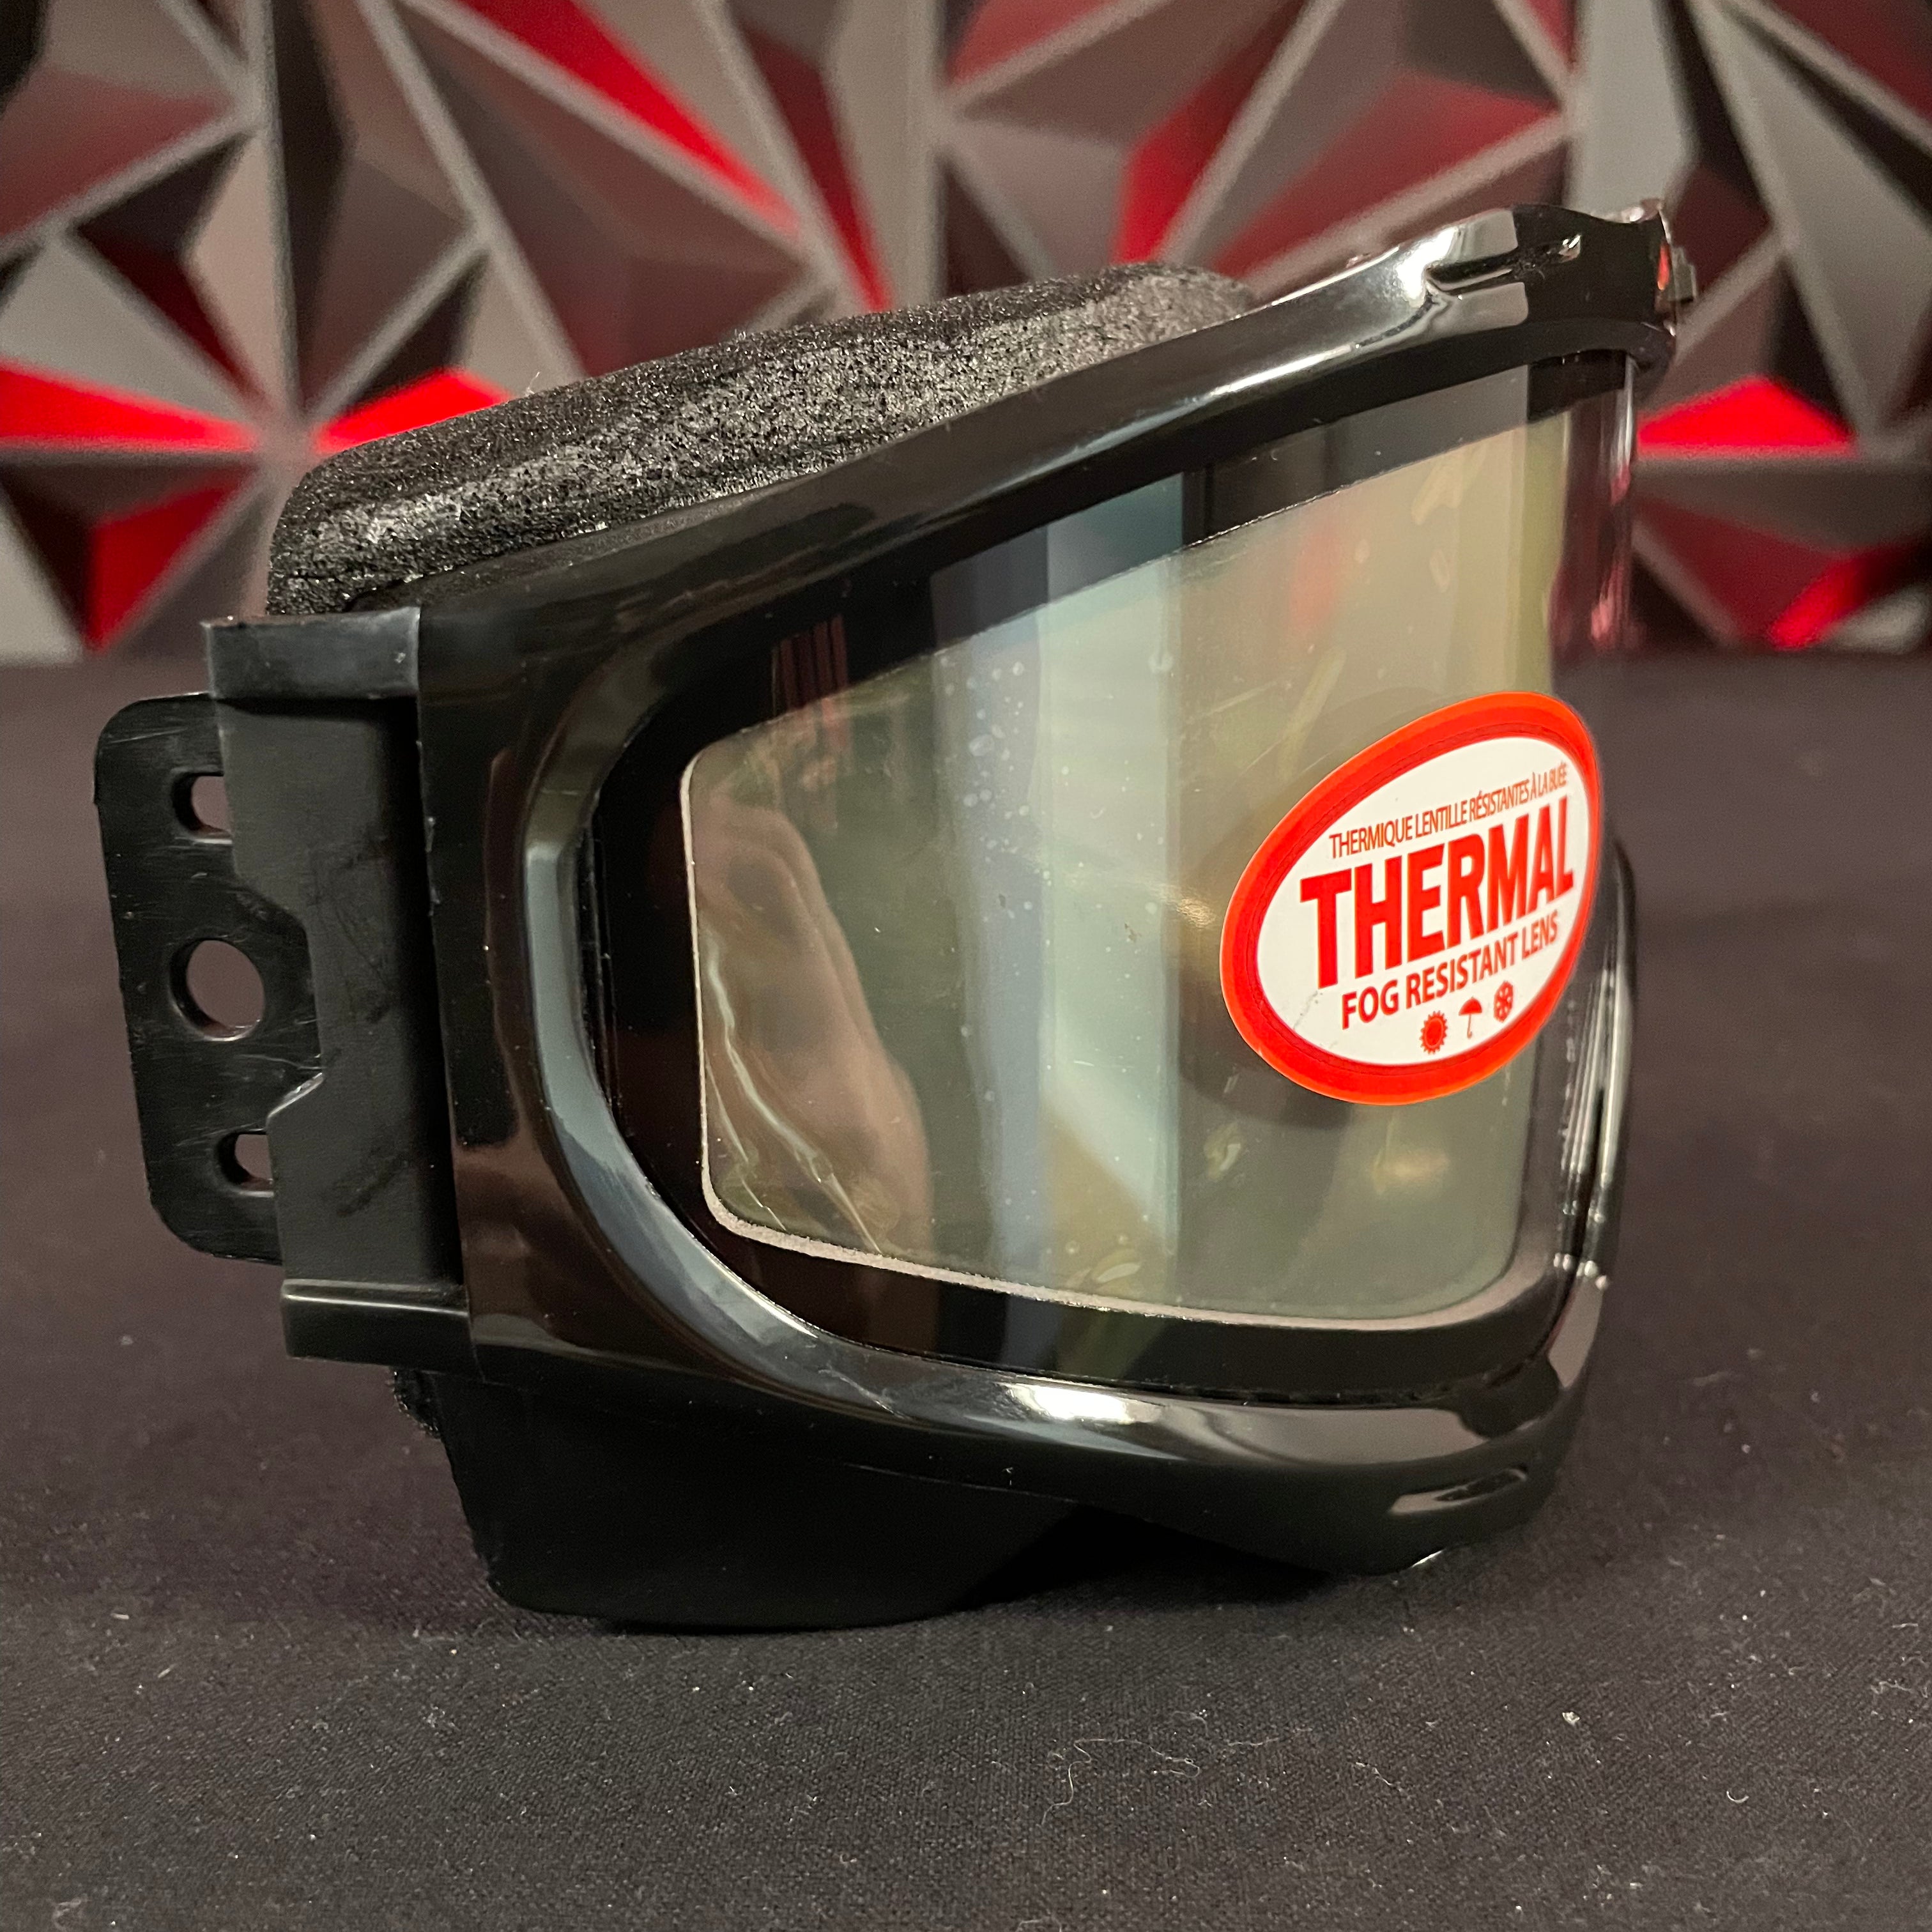 Used JT Prolex Paintball Mask Frame - Black w/ Clear Lens